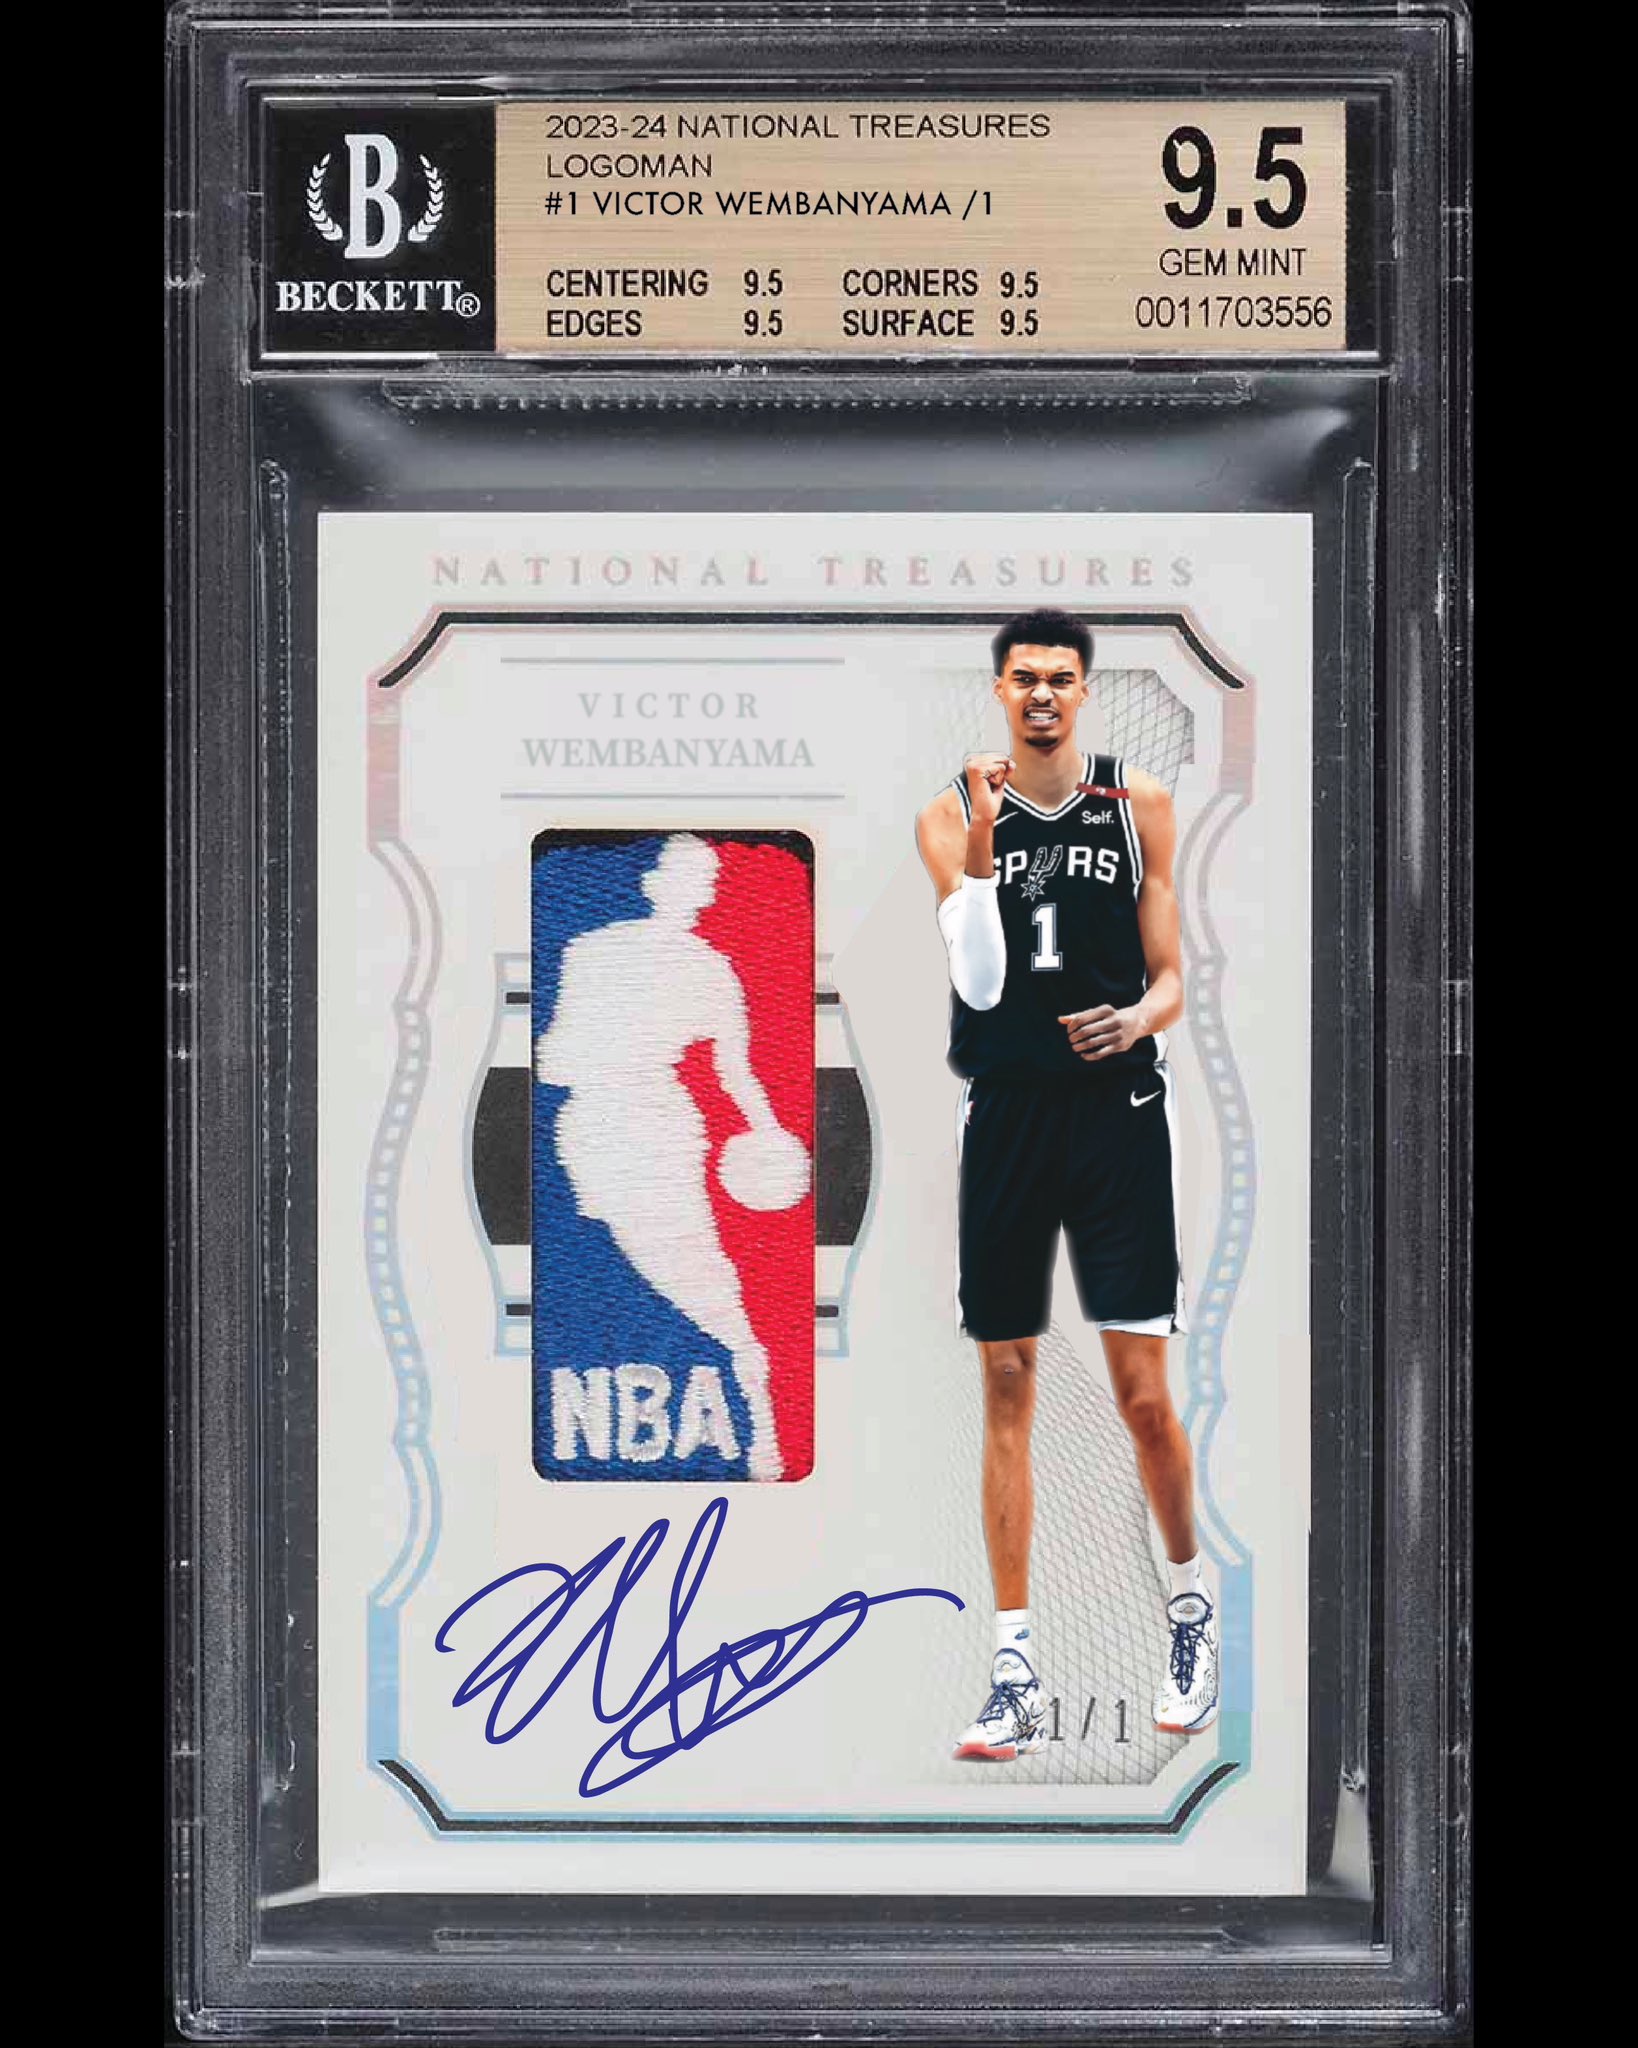 The Collectibles Guru 🧠 on X: This multi-million dollar card won't exist…  While the Victor Wembanyama 1/1 Logoman Autograph rookie could potentially  be a multi-million dollar card, it's unlikely that it'll ever